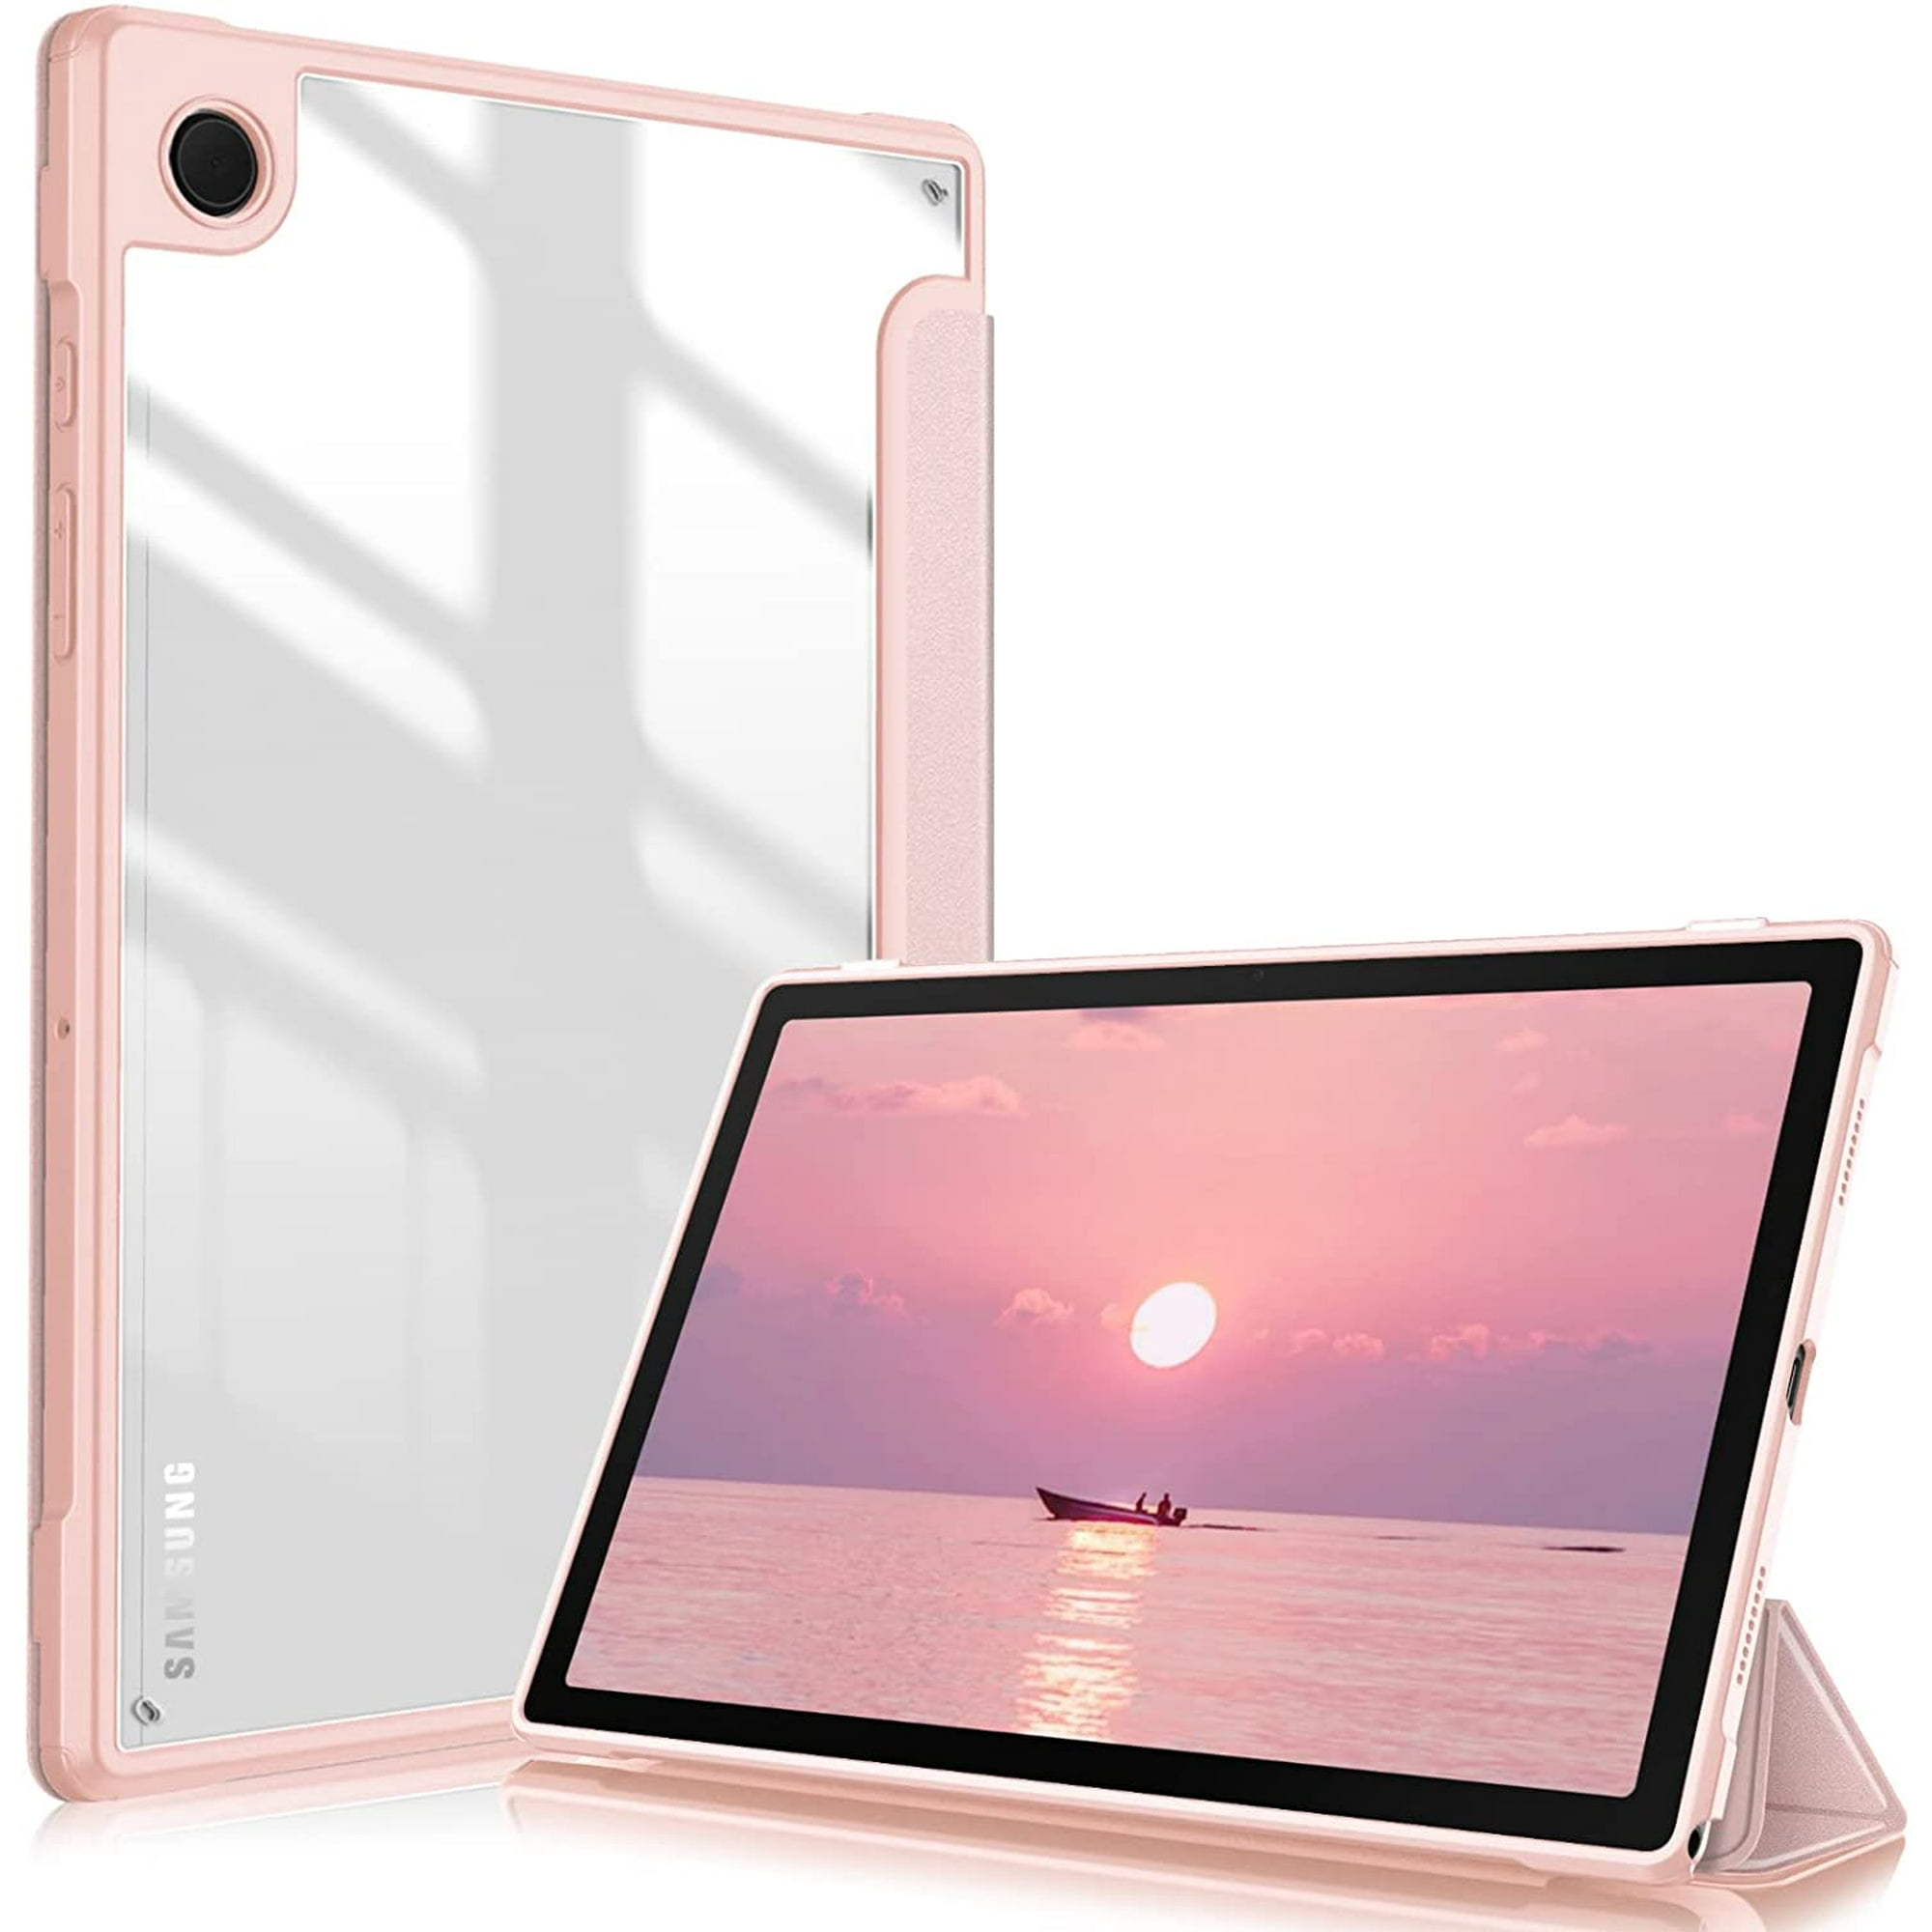 Fintie Shockproof Case for Galaxy Tab A8 10.5 inch 2022 Tablet Model SM-X200/X205/X207, Slim Cover Clear Transparent Shell with Auto Wake/Sleep, Rose -